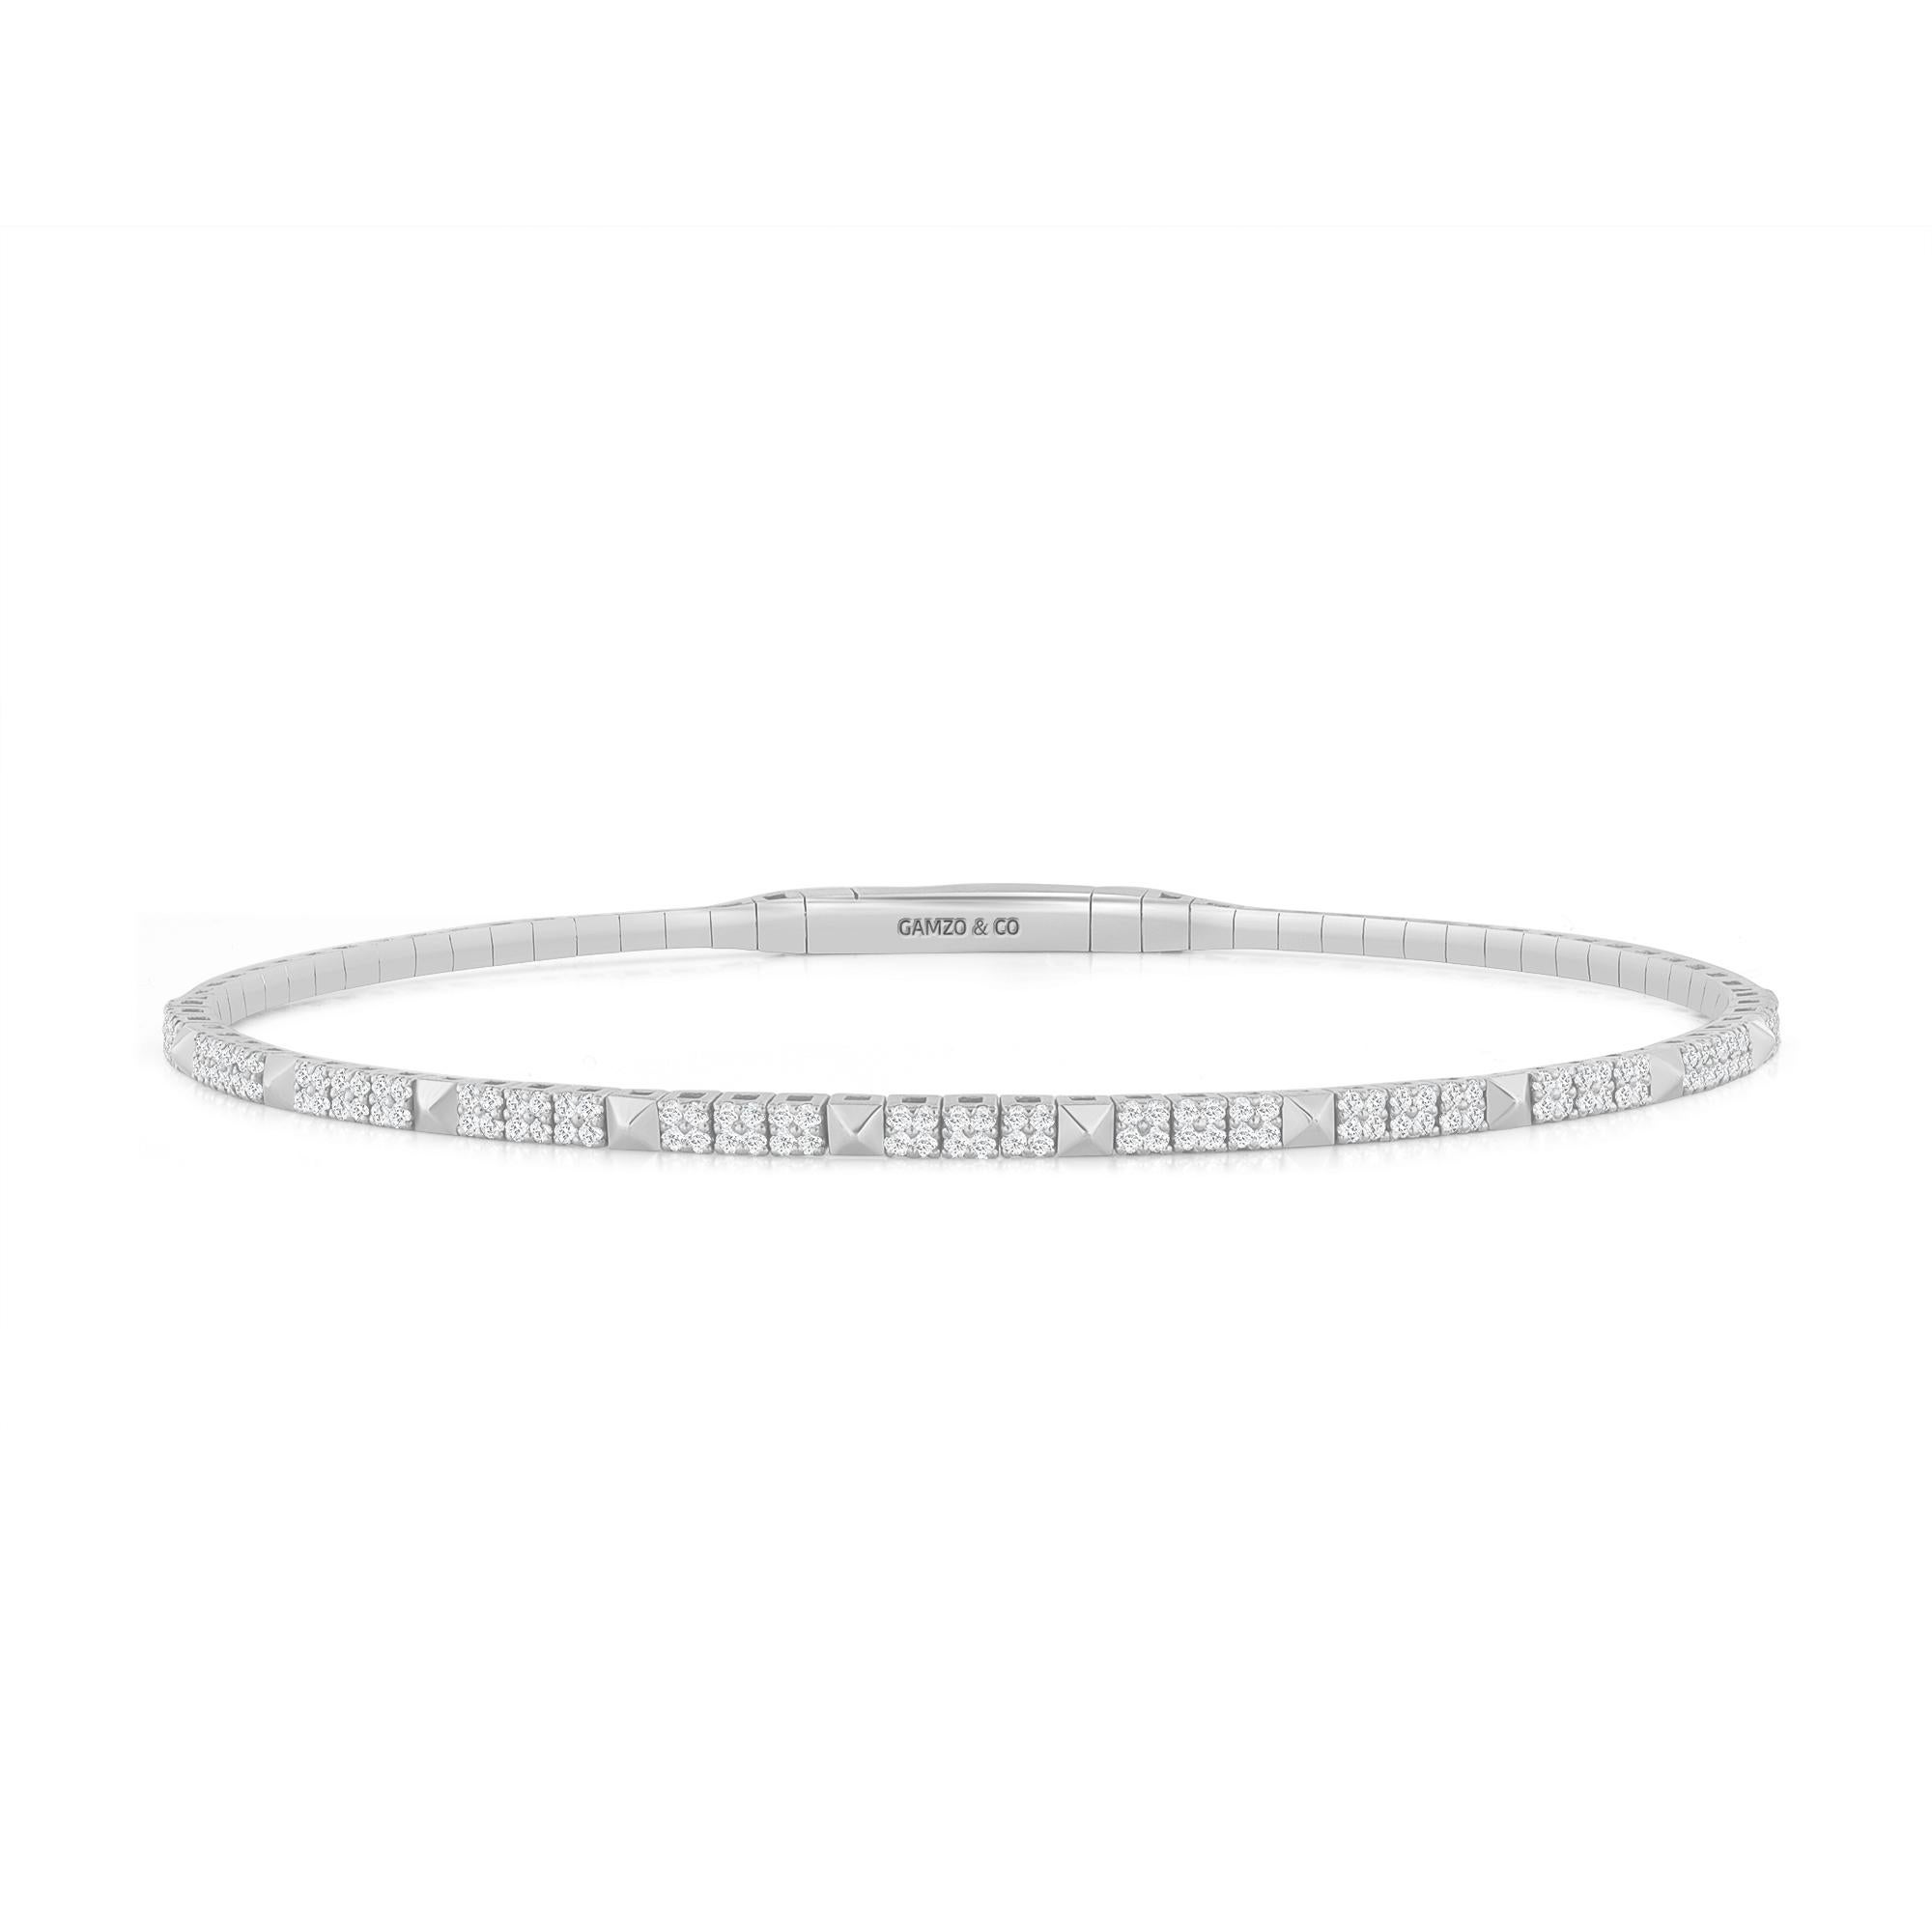 This diamond tennis bangle features beautifully cut round diamonds set gorgeously in 14k gold.

Metal: 14k Gold
Diamond Cut: Round Natural Diamond (Not Lab Grown)
Total Diamond Carats: 0.80 Carats
Diamond Clarity: VS
Diamond Color: F-G
Color: White